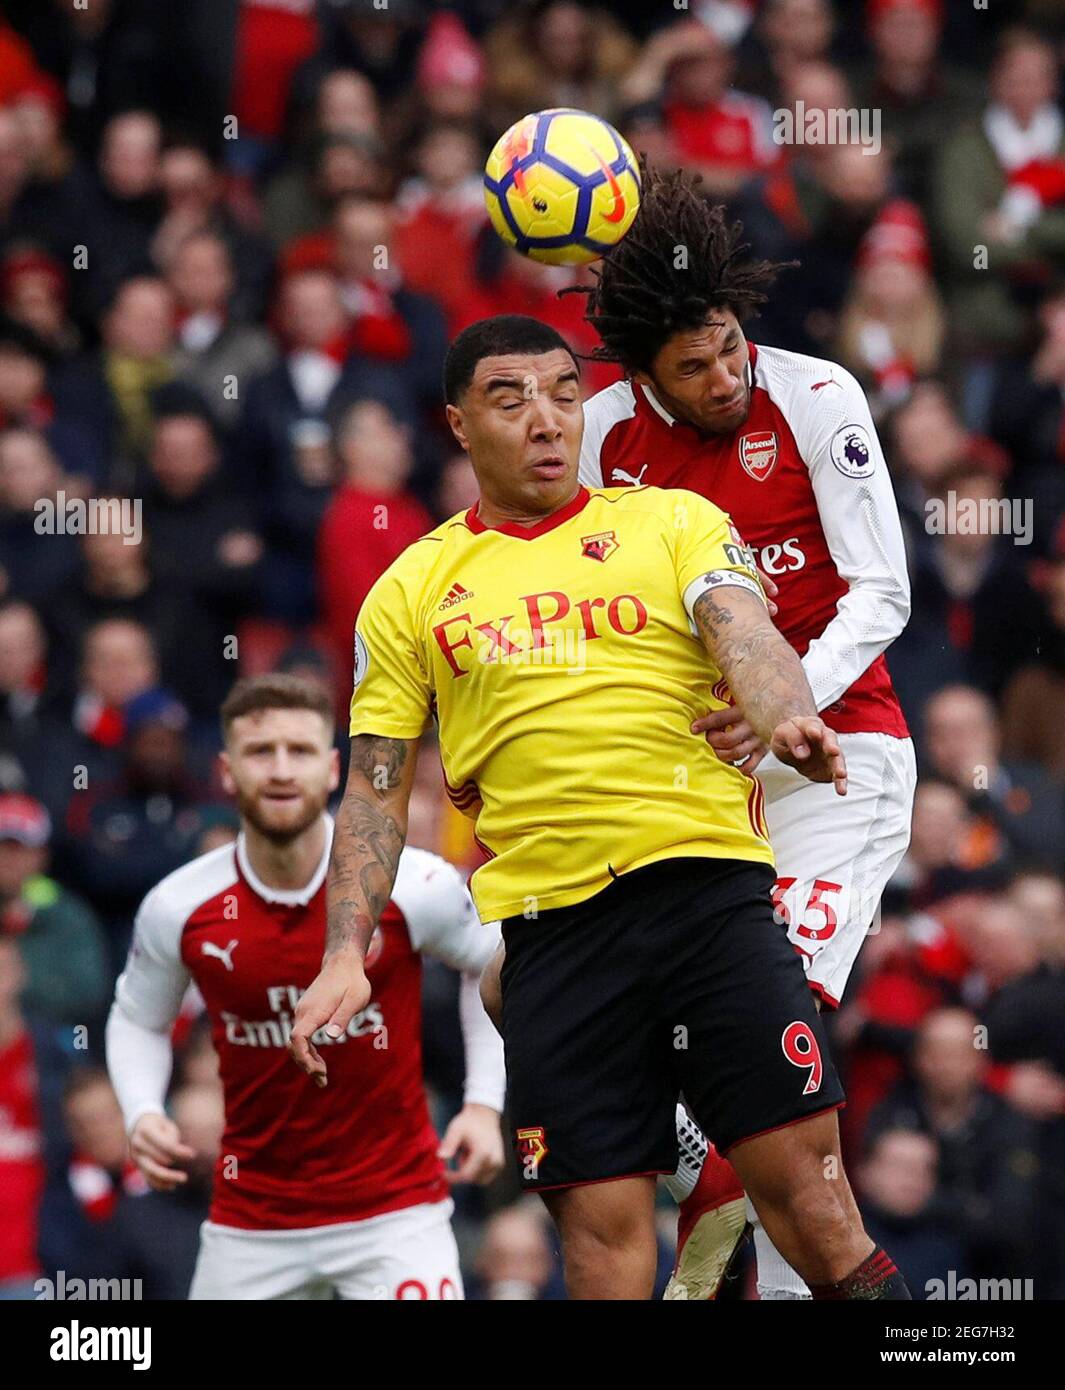 Soccer Football - Premier League - Arsenal vs Watford - Emirates Stadium, London, Britain - March 11, 2018   Watford's Troy Deeney in action with Arsenal's Mohamed Elneny       REUTERS/Eddie Keogh    EDITORIAL USE ONLY. No use with unauthorized audio, video, data, fixture lists, club/league logos or 'live' services. Online in-match use limited to 75 images, no video emulation. No use in betting, games or single club/league/player publications.  Please contact your account representative for further details. Stock Photo